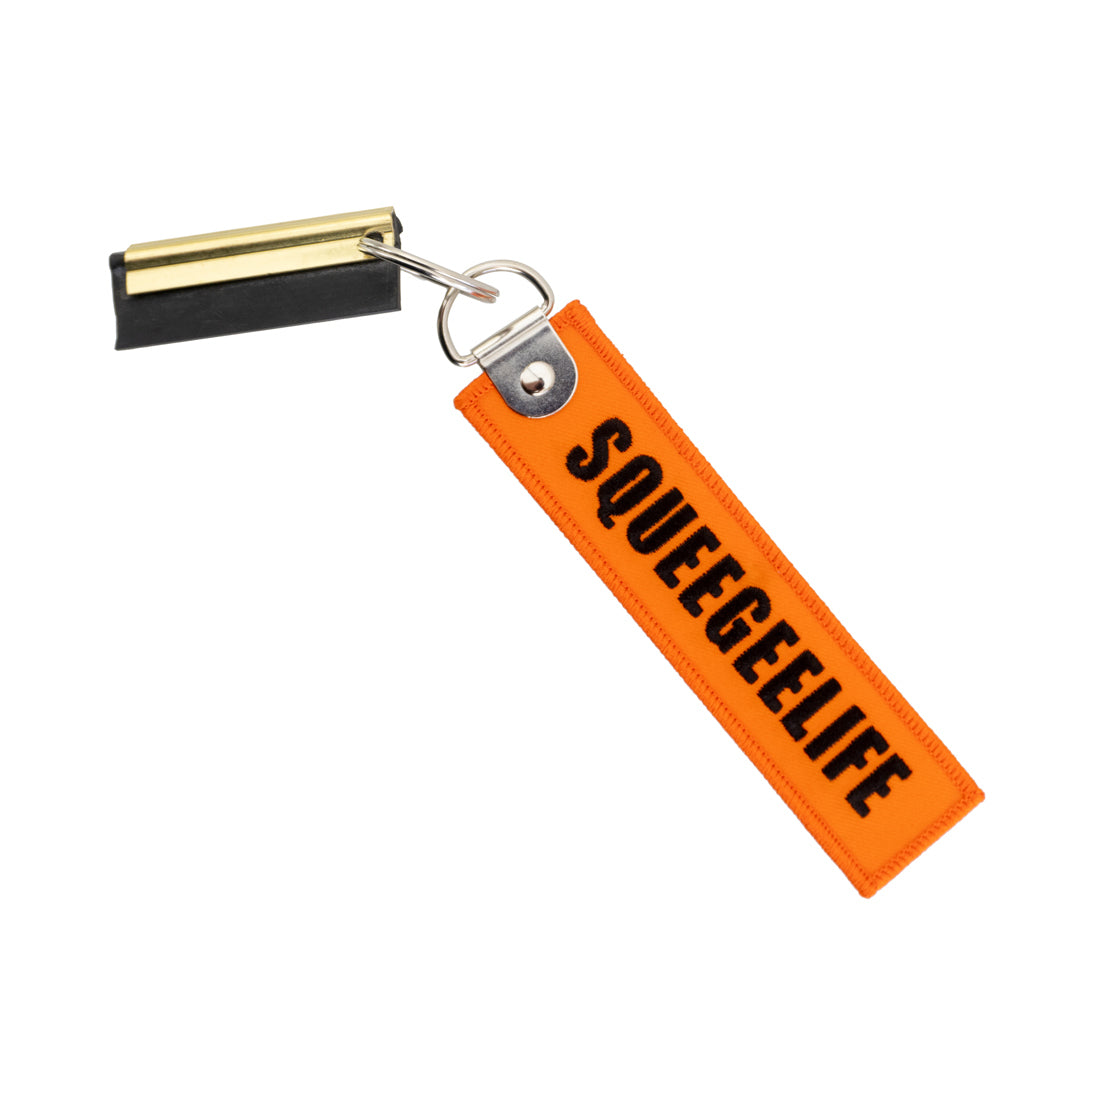 Squeegee Life the Keychains Brass Style Squeegee and Keychain View